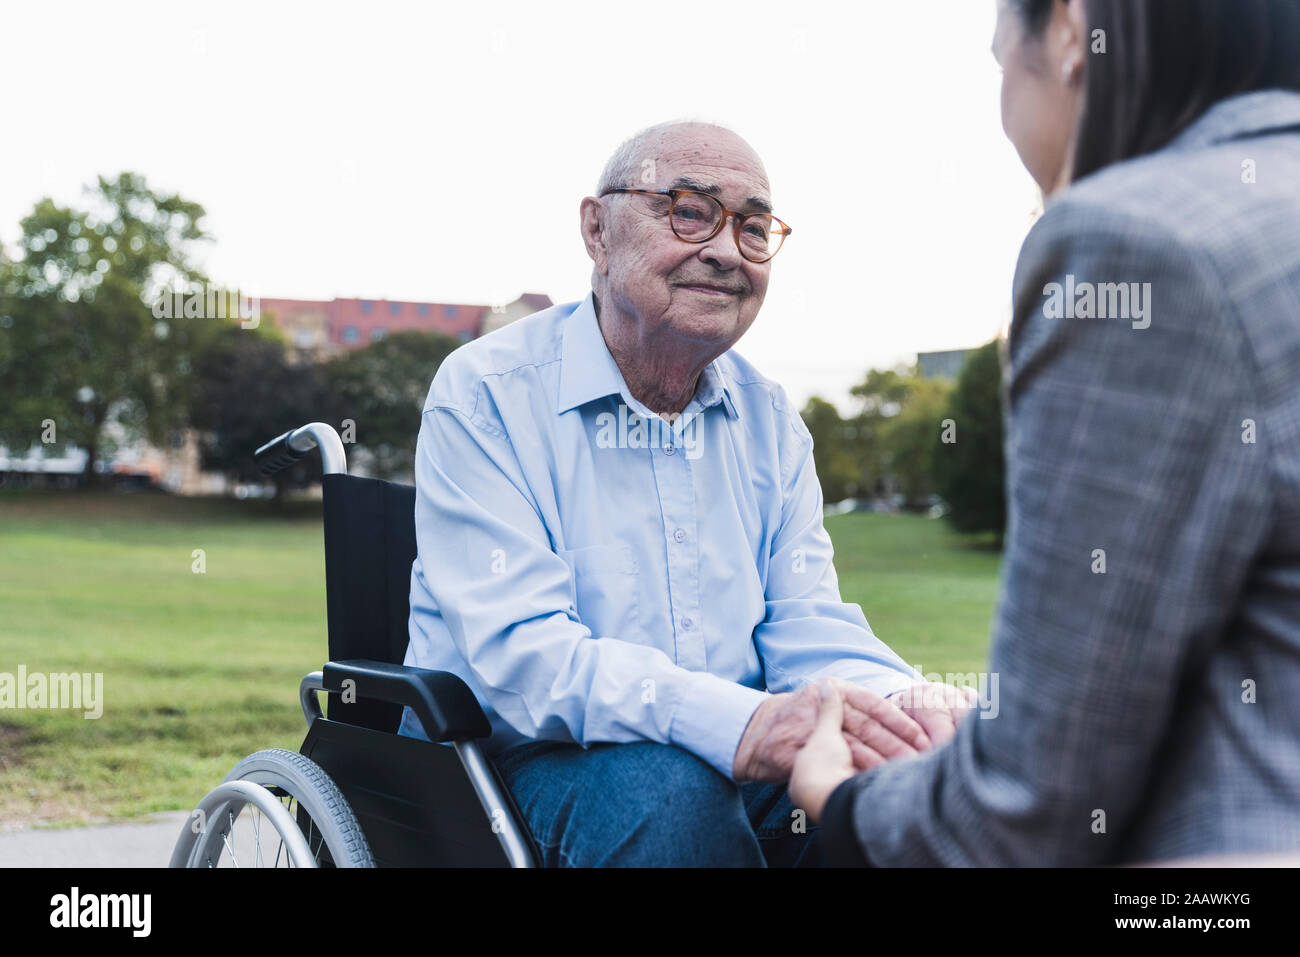 Portrait of senior man sitting in wheel chair holding hands with his granddaughter Stock Photo